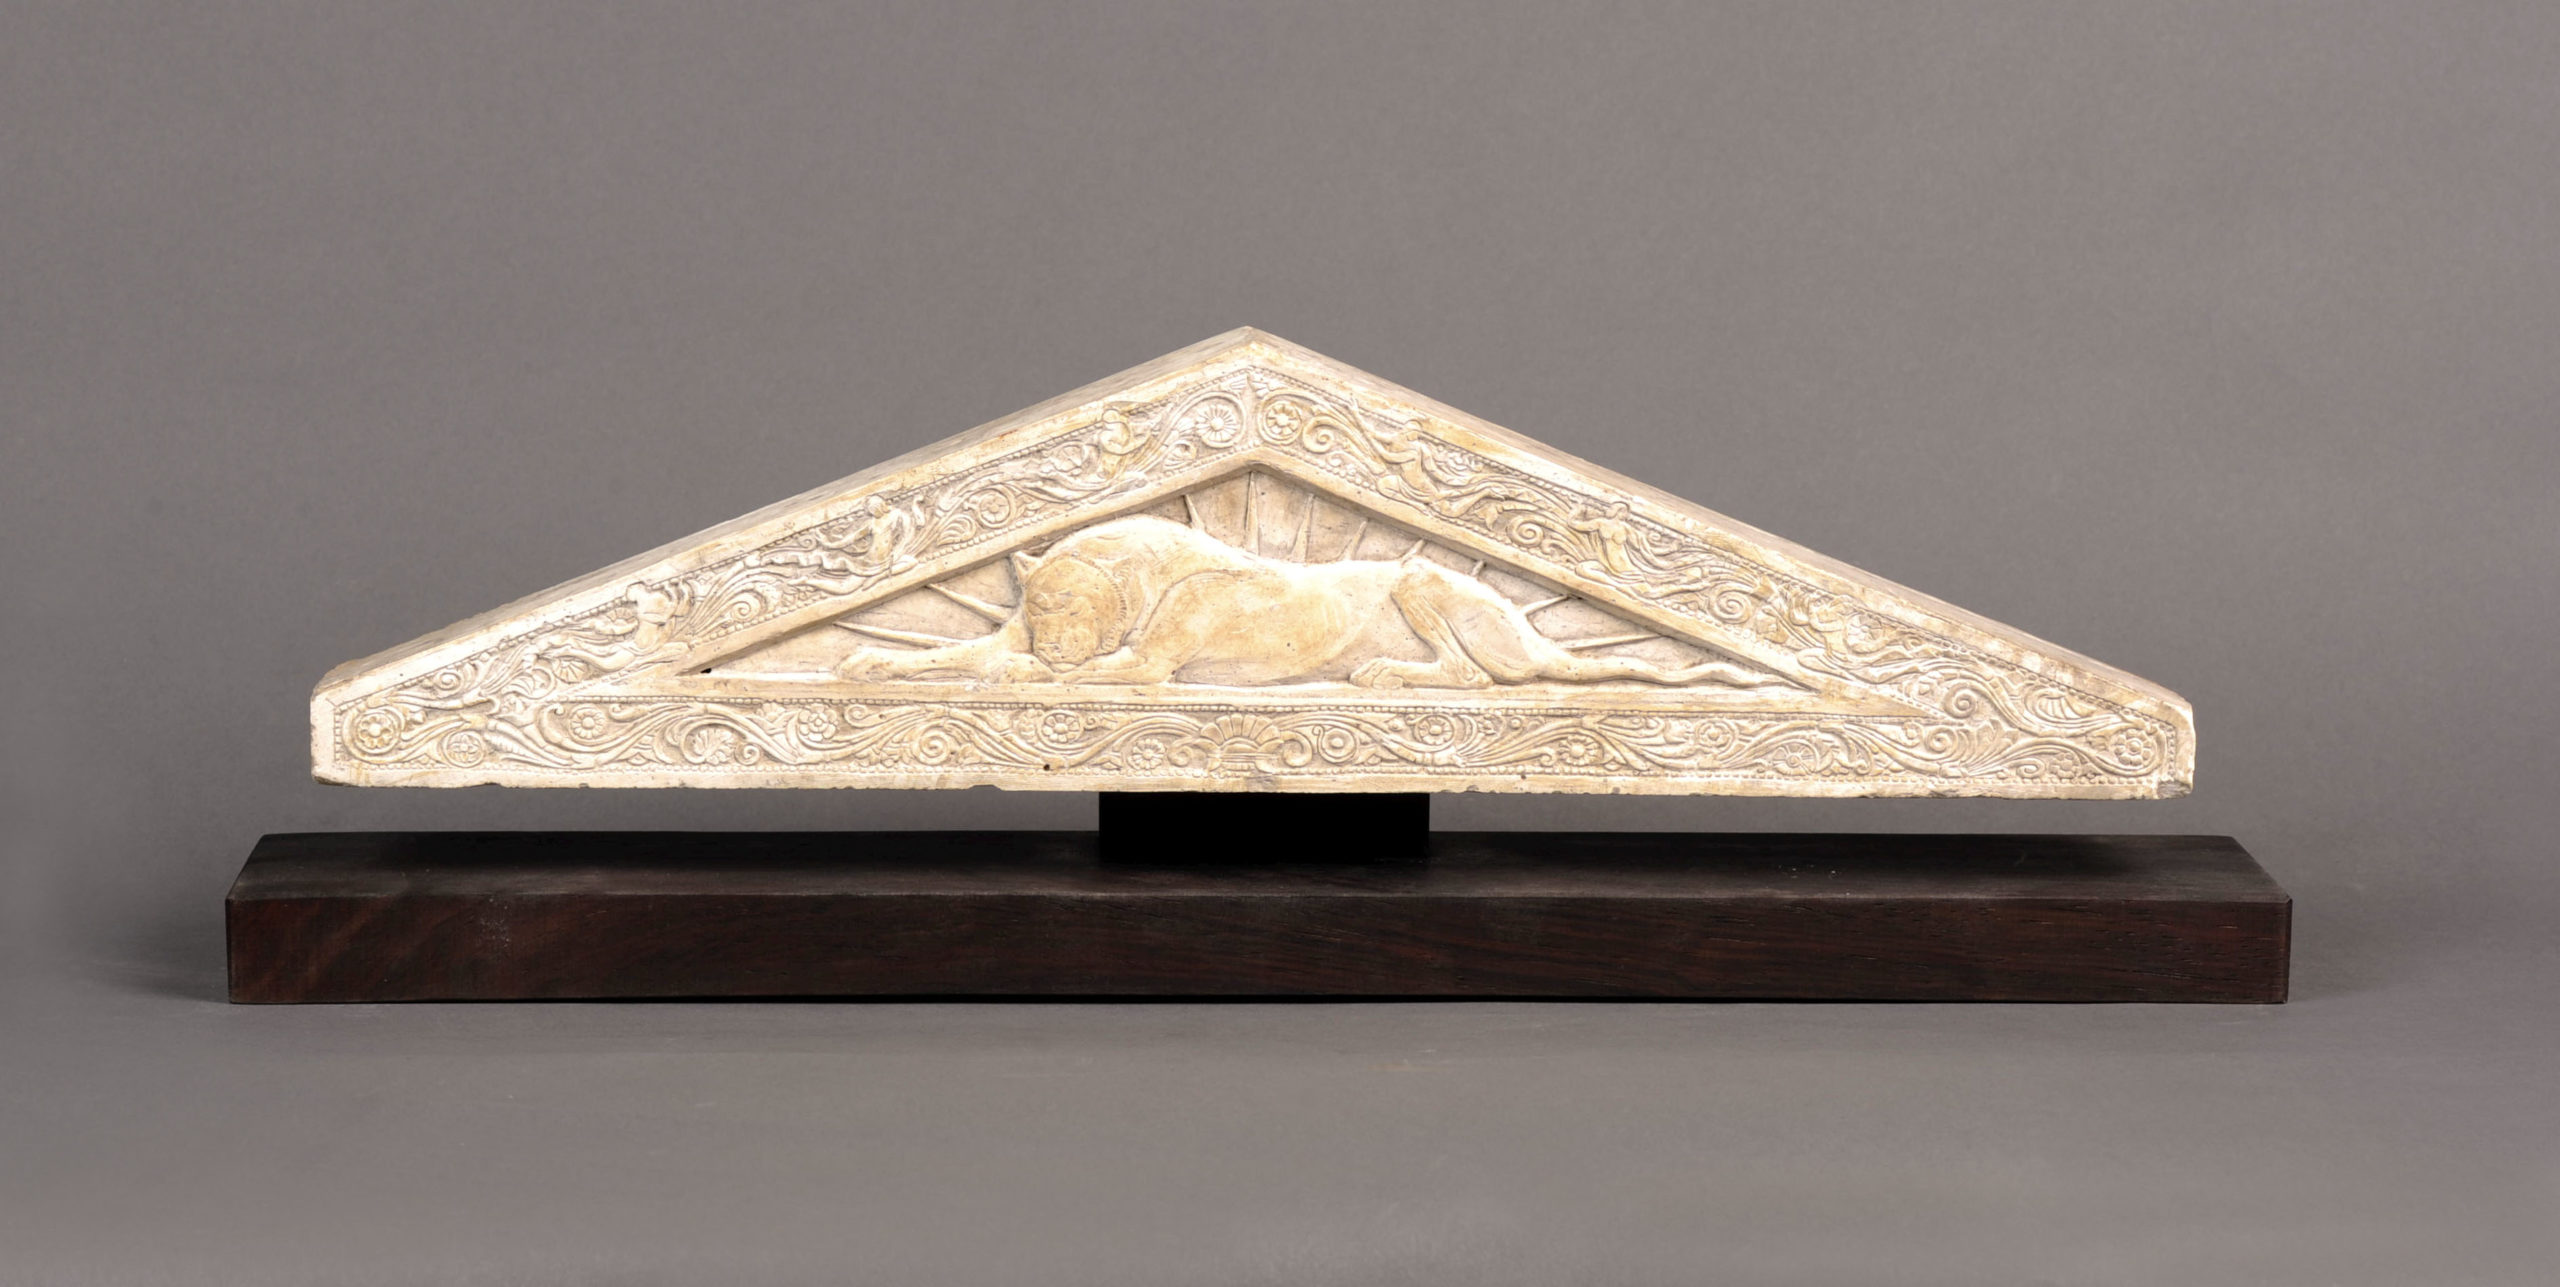 
		                					Paul Howard Manship		                																	
																											<i>Plaster Sketch-model for the John Pierpont Morgan Memorial Pediment,</i>  
																																								By Paul Howard Manship and Gaston Lachaise, ca. 1916, 
																																								plaster with patina, 
																																								3 1/2 x 15 3/4 inches 
																								
		                				